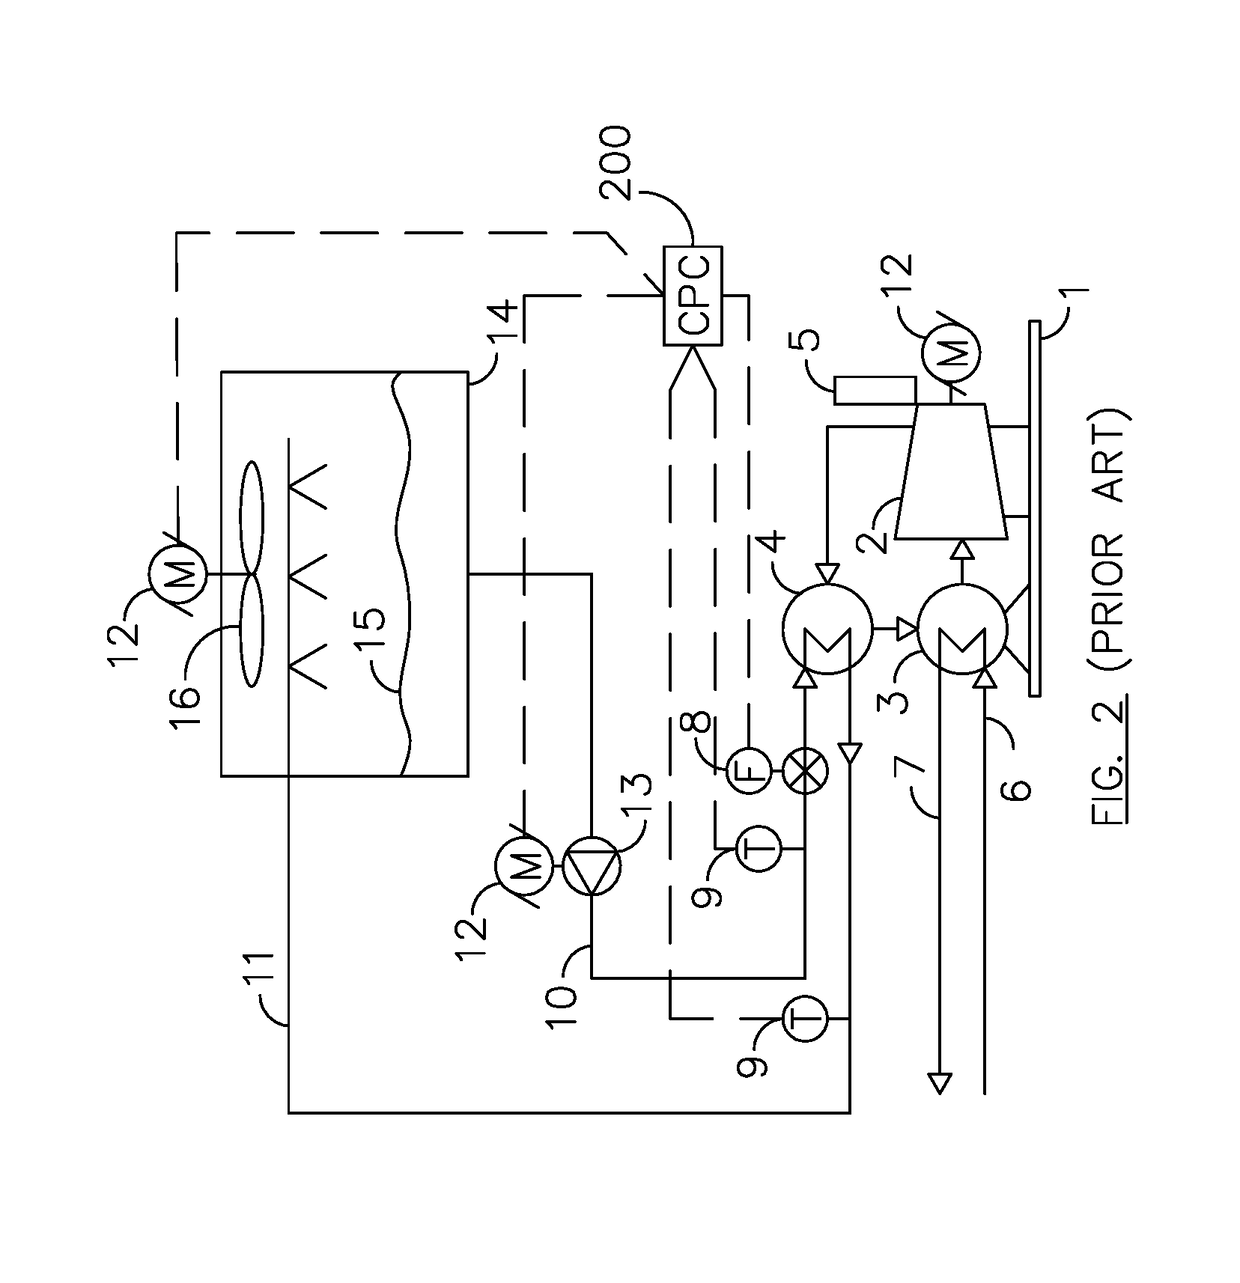 Method to determine performance of a chiller and chiller plant